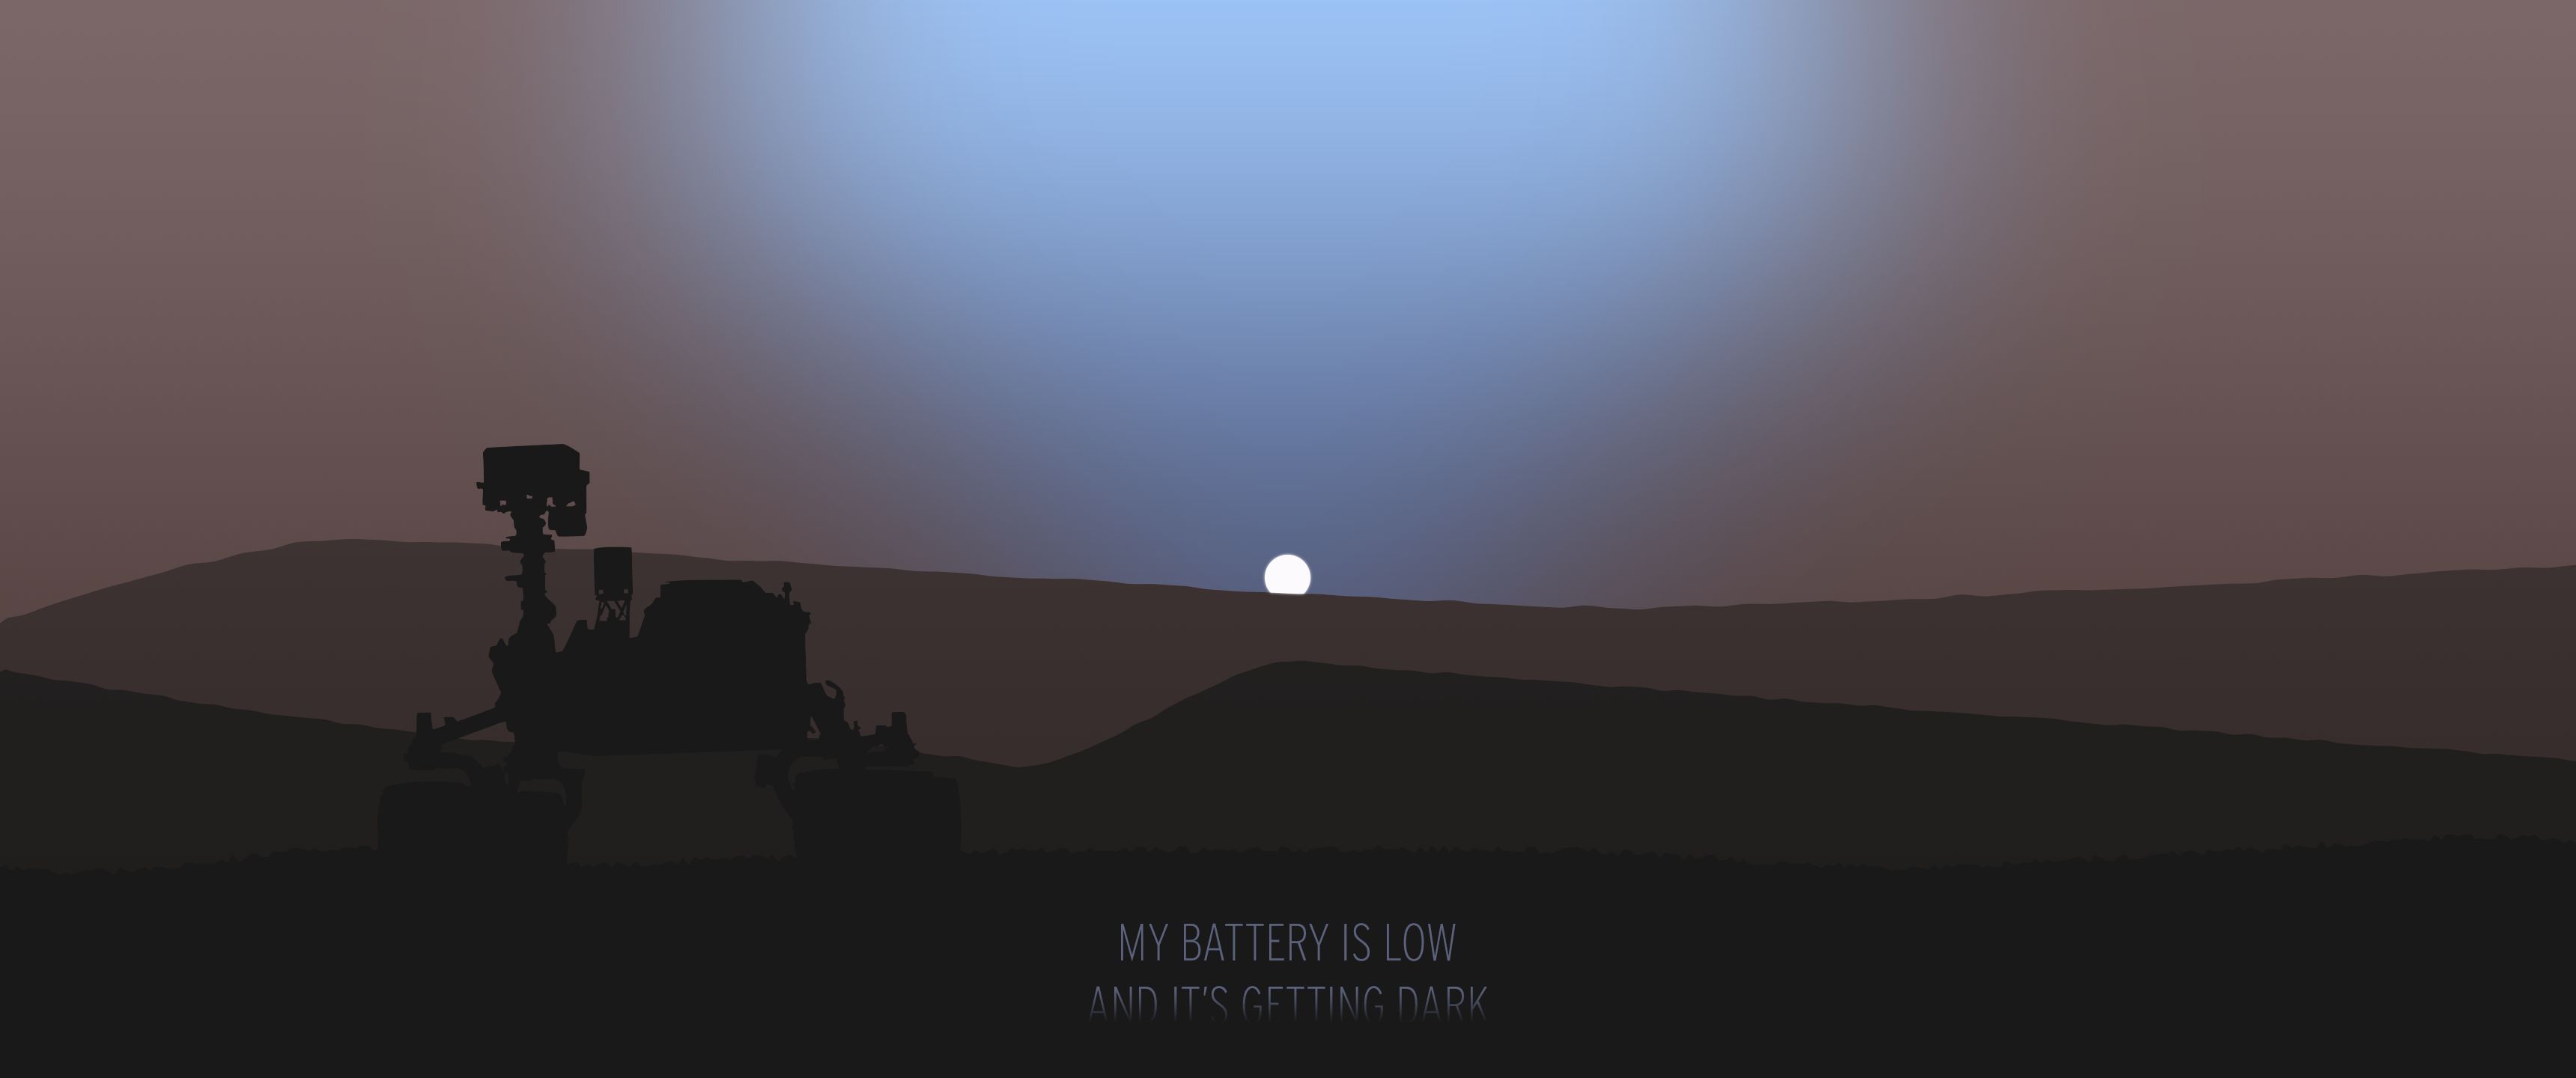 My Battery Is Low And It's Getting Dark - HD Wallpaper 